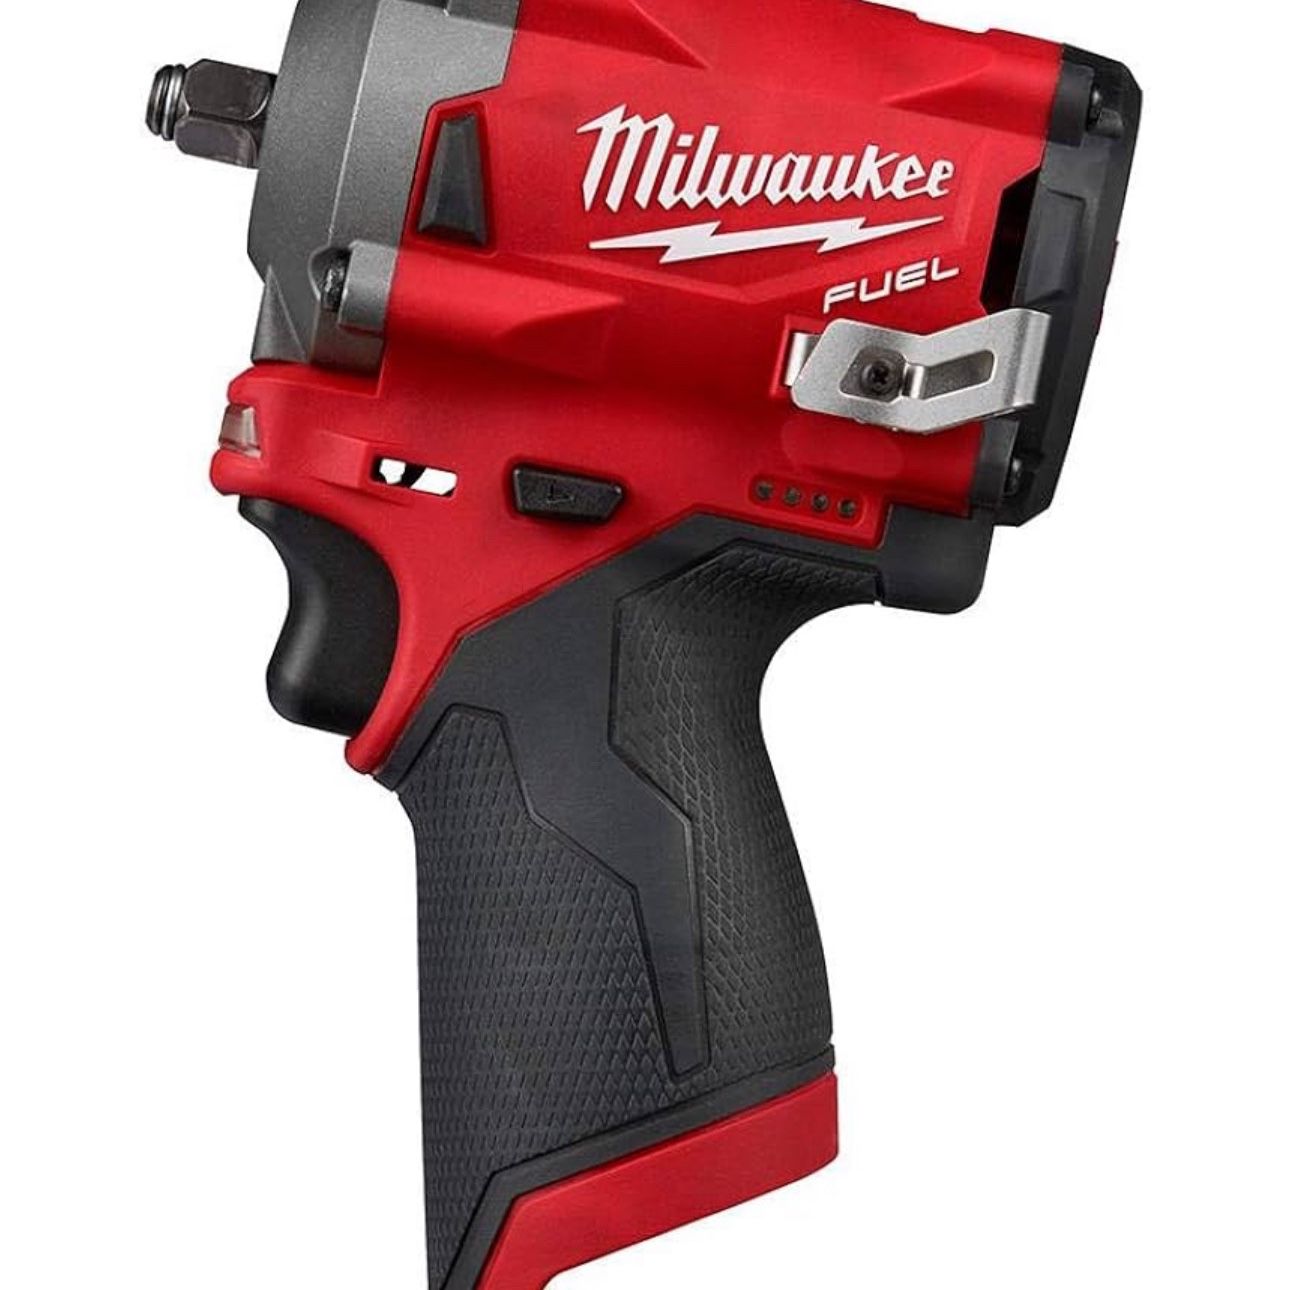 Milwaukee 2554-20 M12 Fuel Stubby 3/8 Impact Wrench (tool only)